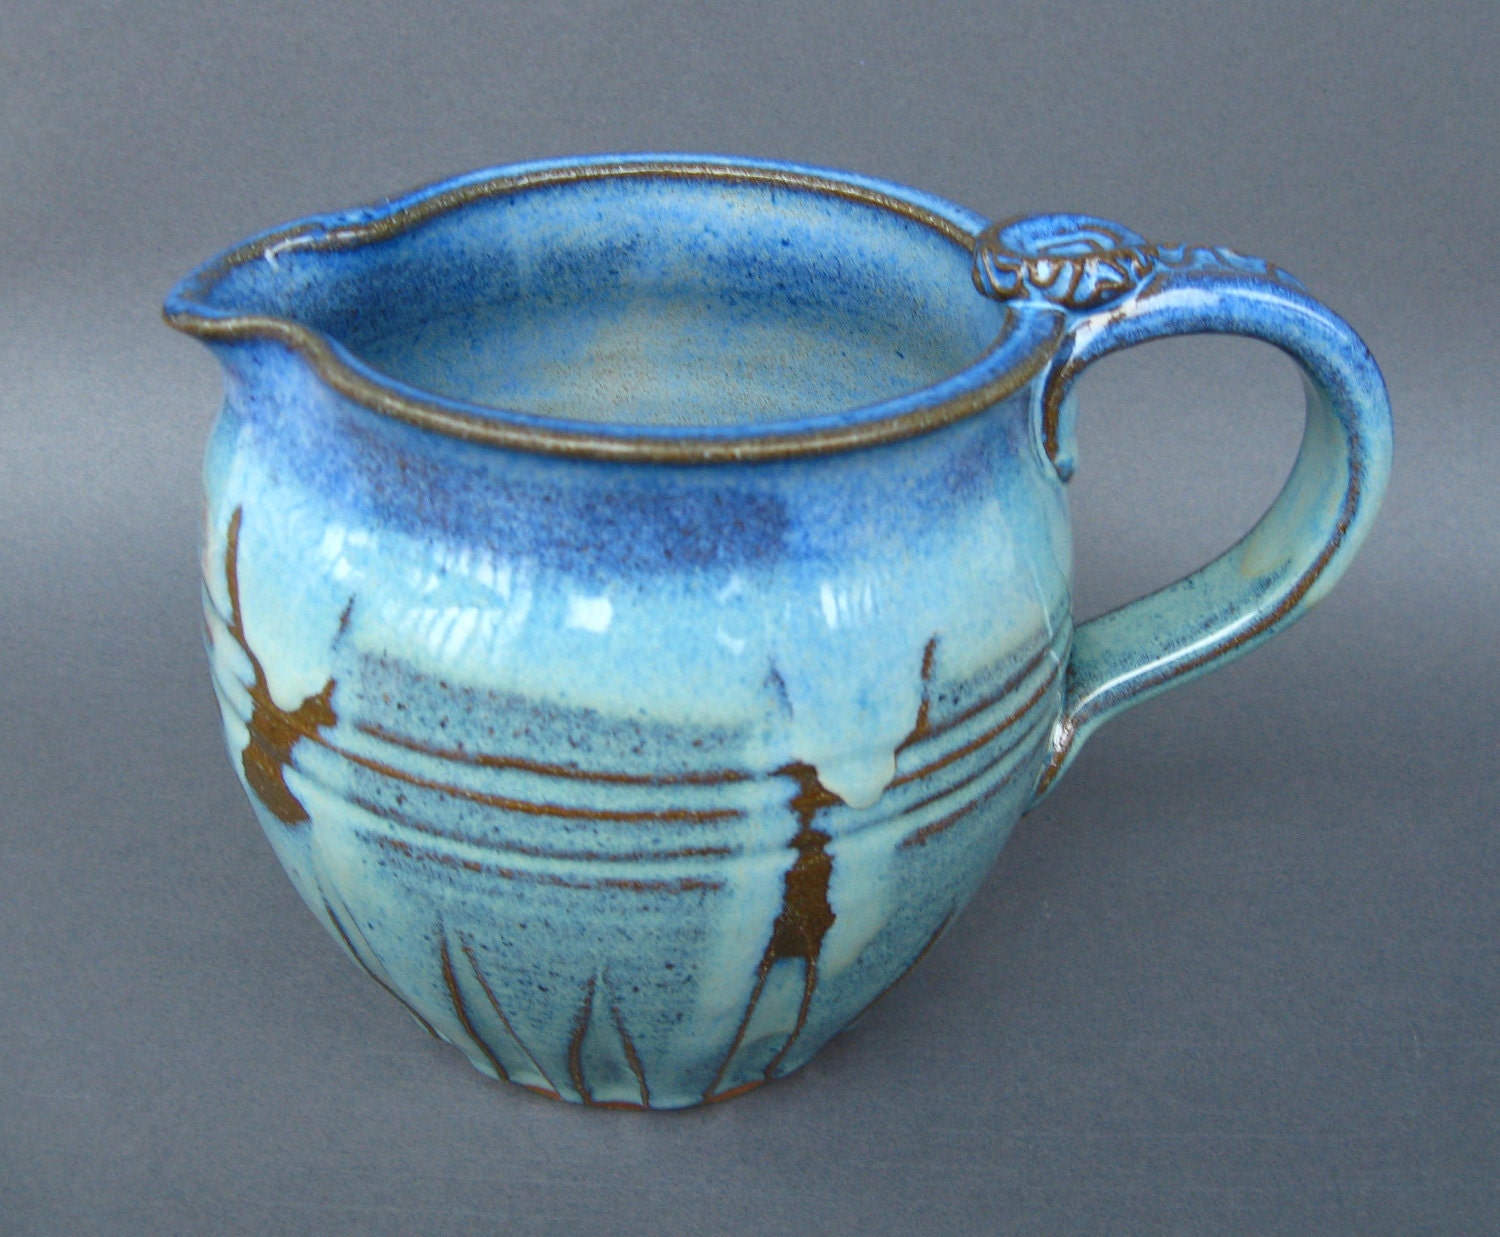 Stoneware Water Serving Pitcher in Cobalt Blue and Teal Green Drip Glazes Wheel Thrown Handmade Pottery Jug - TheMudPlace